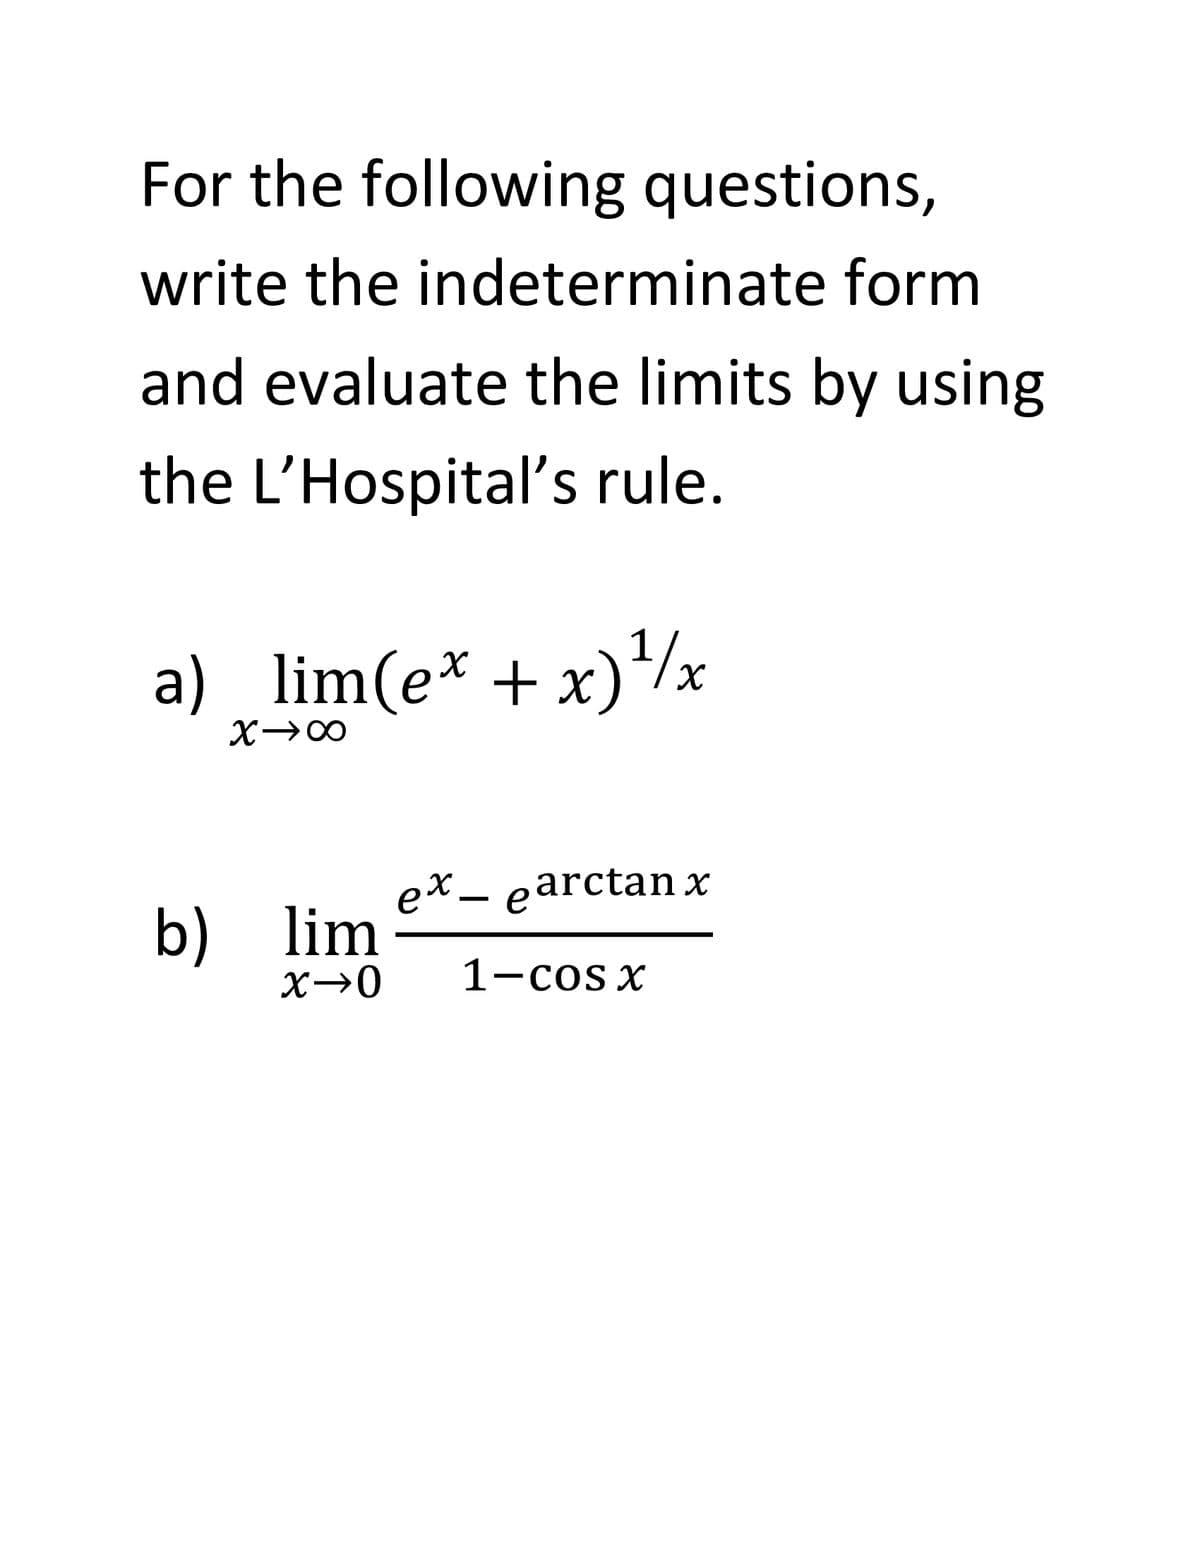 For the following questions,
write the indeterminate form
and evaluate the limits by using
the L'Hospital's rule.
a) lim(e* + x)/x
X→00
ex – earctanx
b) lim
X→0
1-cos x
